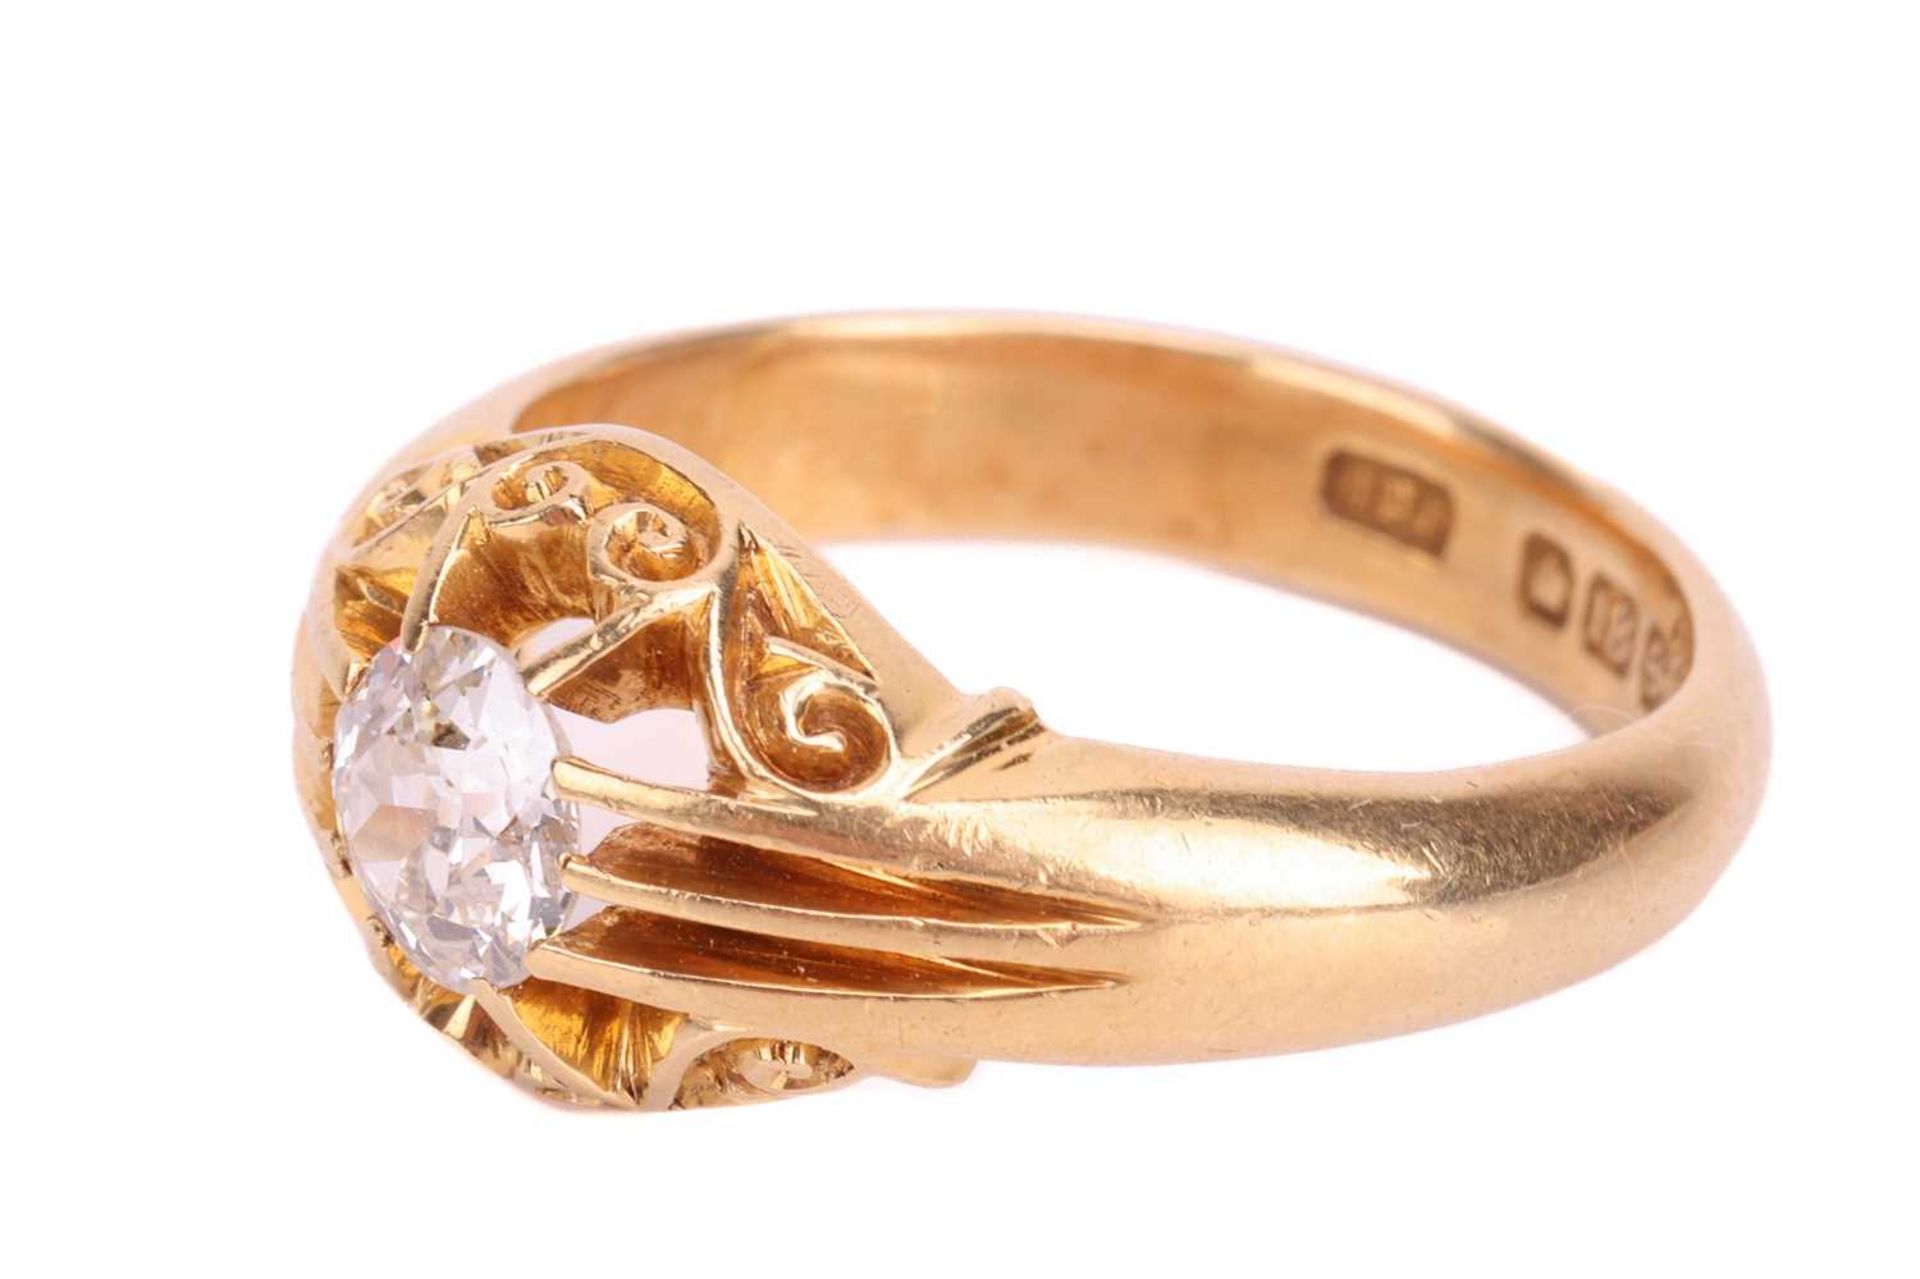 An Edwardian diamond belcher ring in 18ct gold, comprising an old-cut diamond of 5.6 x 5.6 x 2.8 mm, - Image 3 of 4